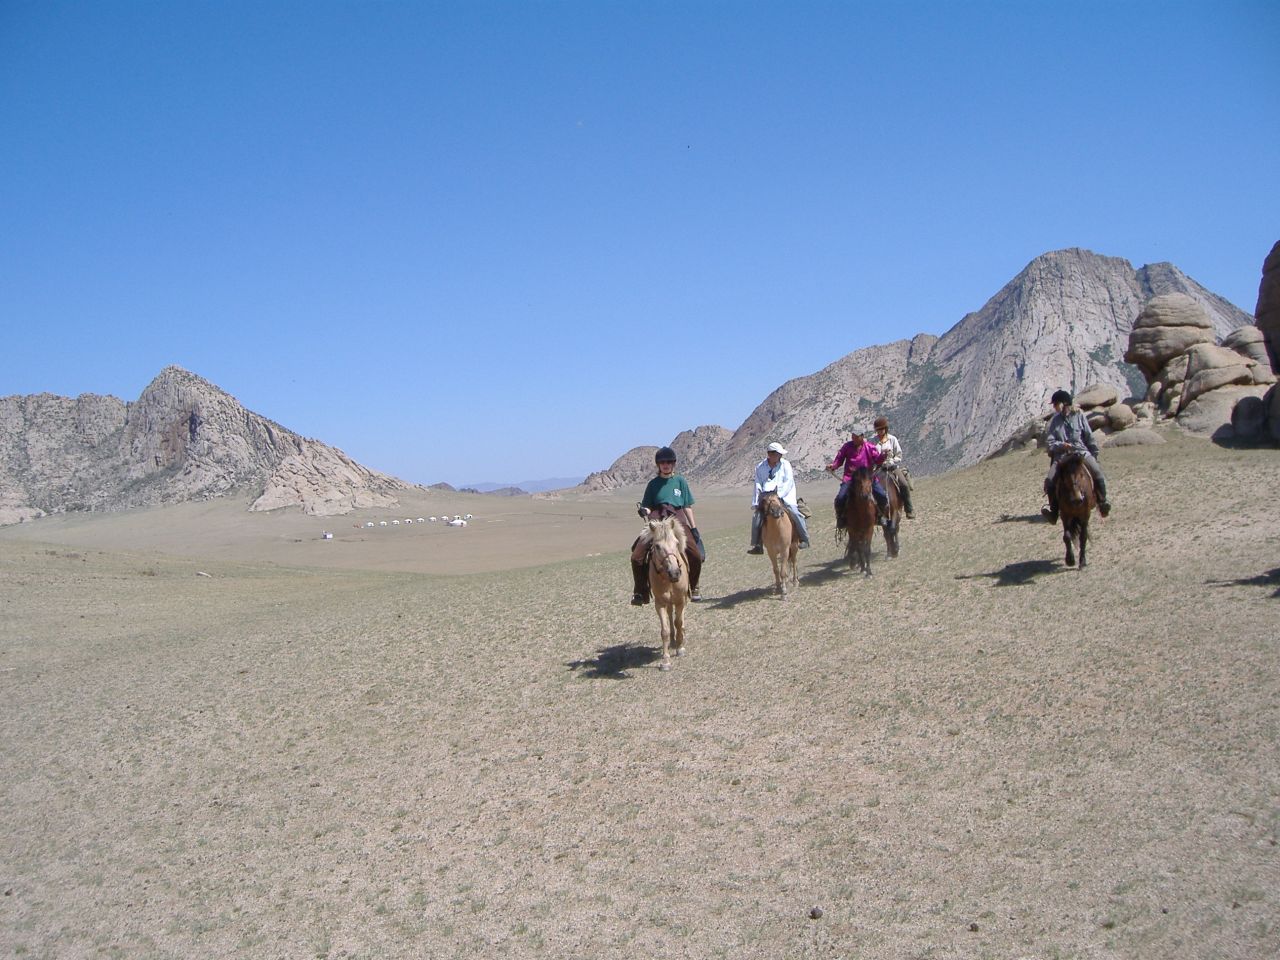 Riding across the vast Mongolian wildernesses is a pleasure that future generations might not get to experience, Sales thinks. "Places like Mongolia are changing so quickly -- they've already got mobile phones and satellite dishes, so I don't know how long it's going to be like that," he says.  